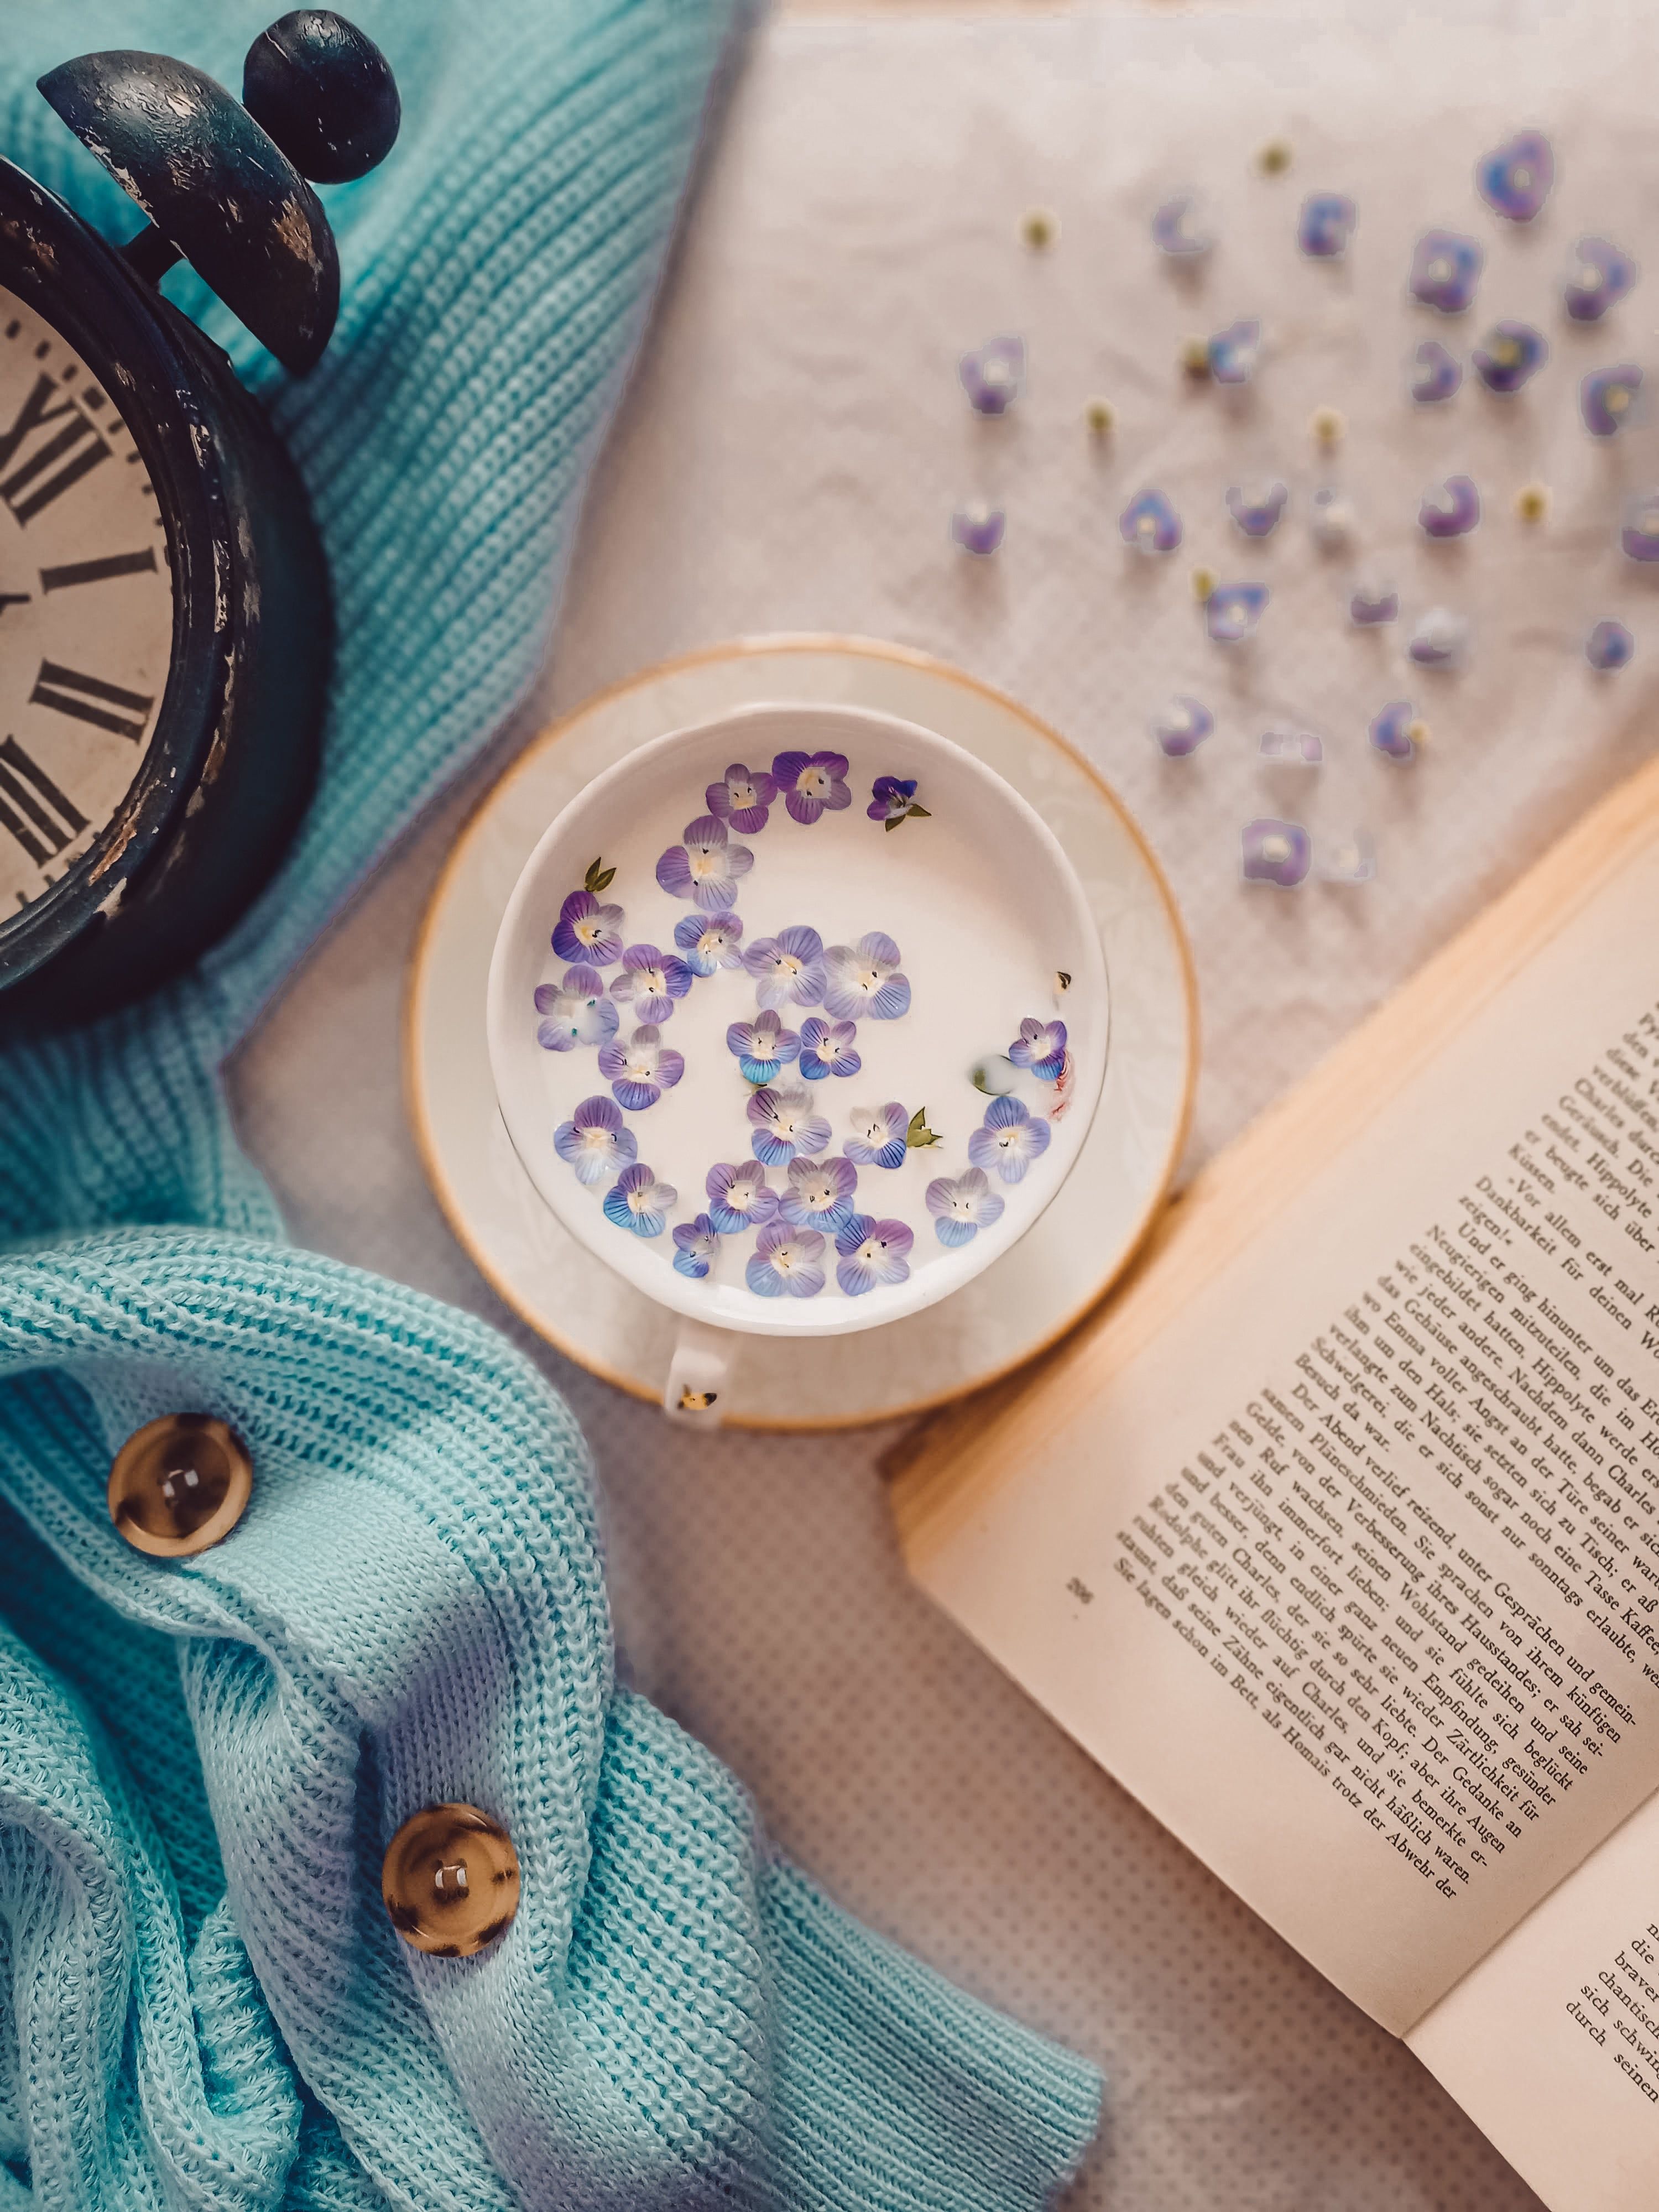 A clock, book and cup of tea on the table - Books, vintage fall, milk